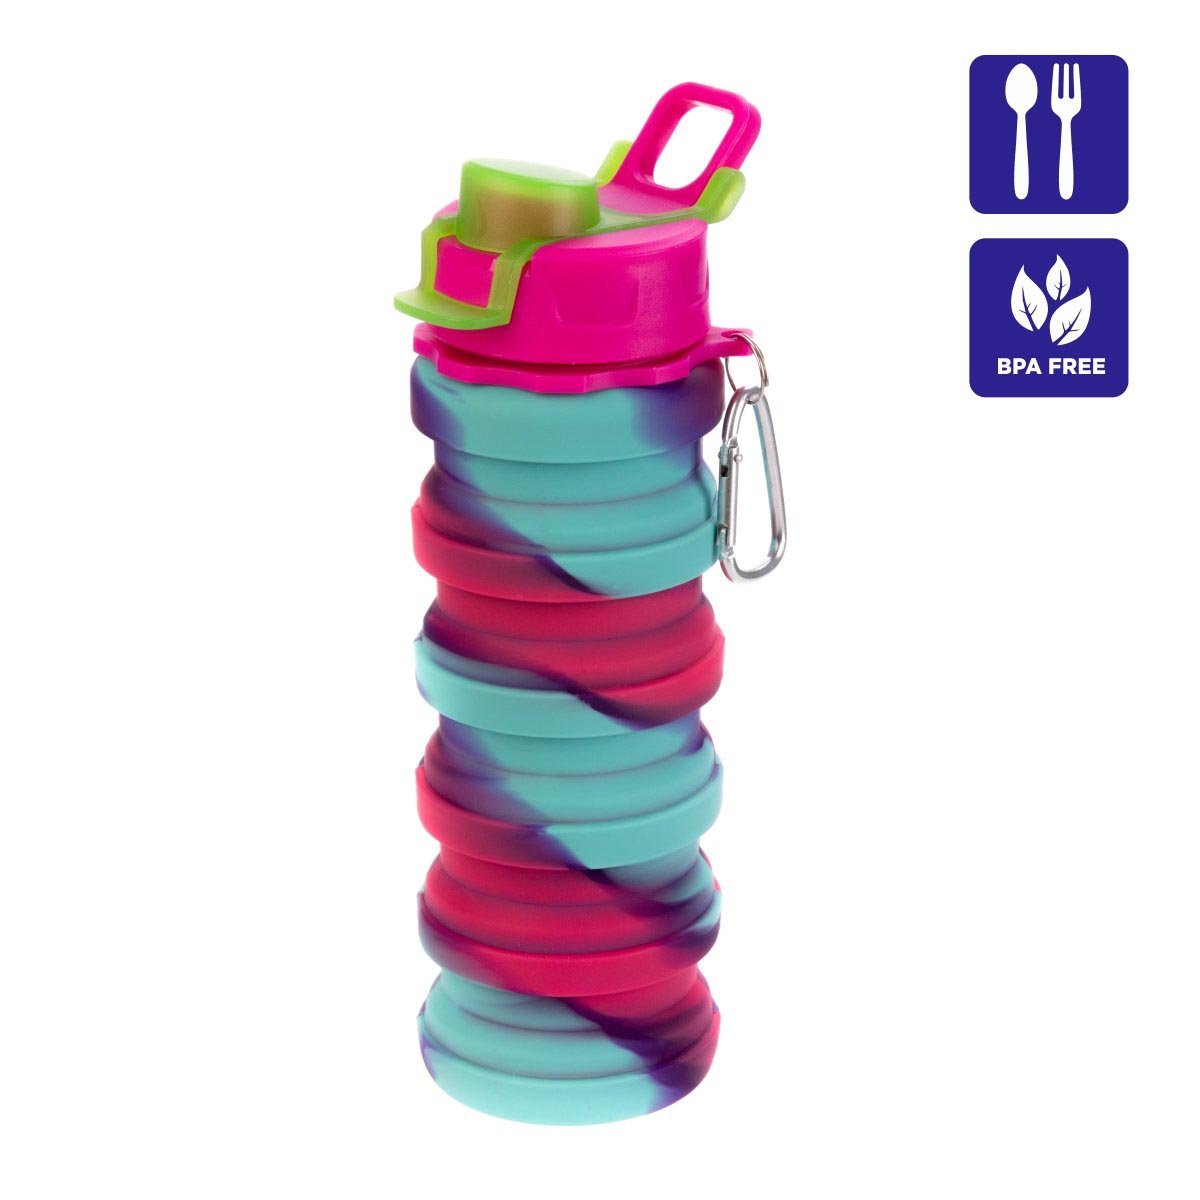 Portable Collapsible Silicone Water Bottle with a Straw Lid, 16 oz is BPA-free